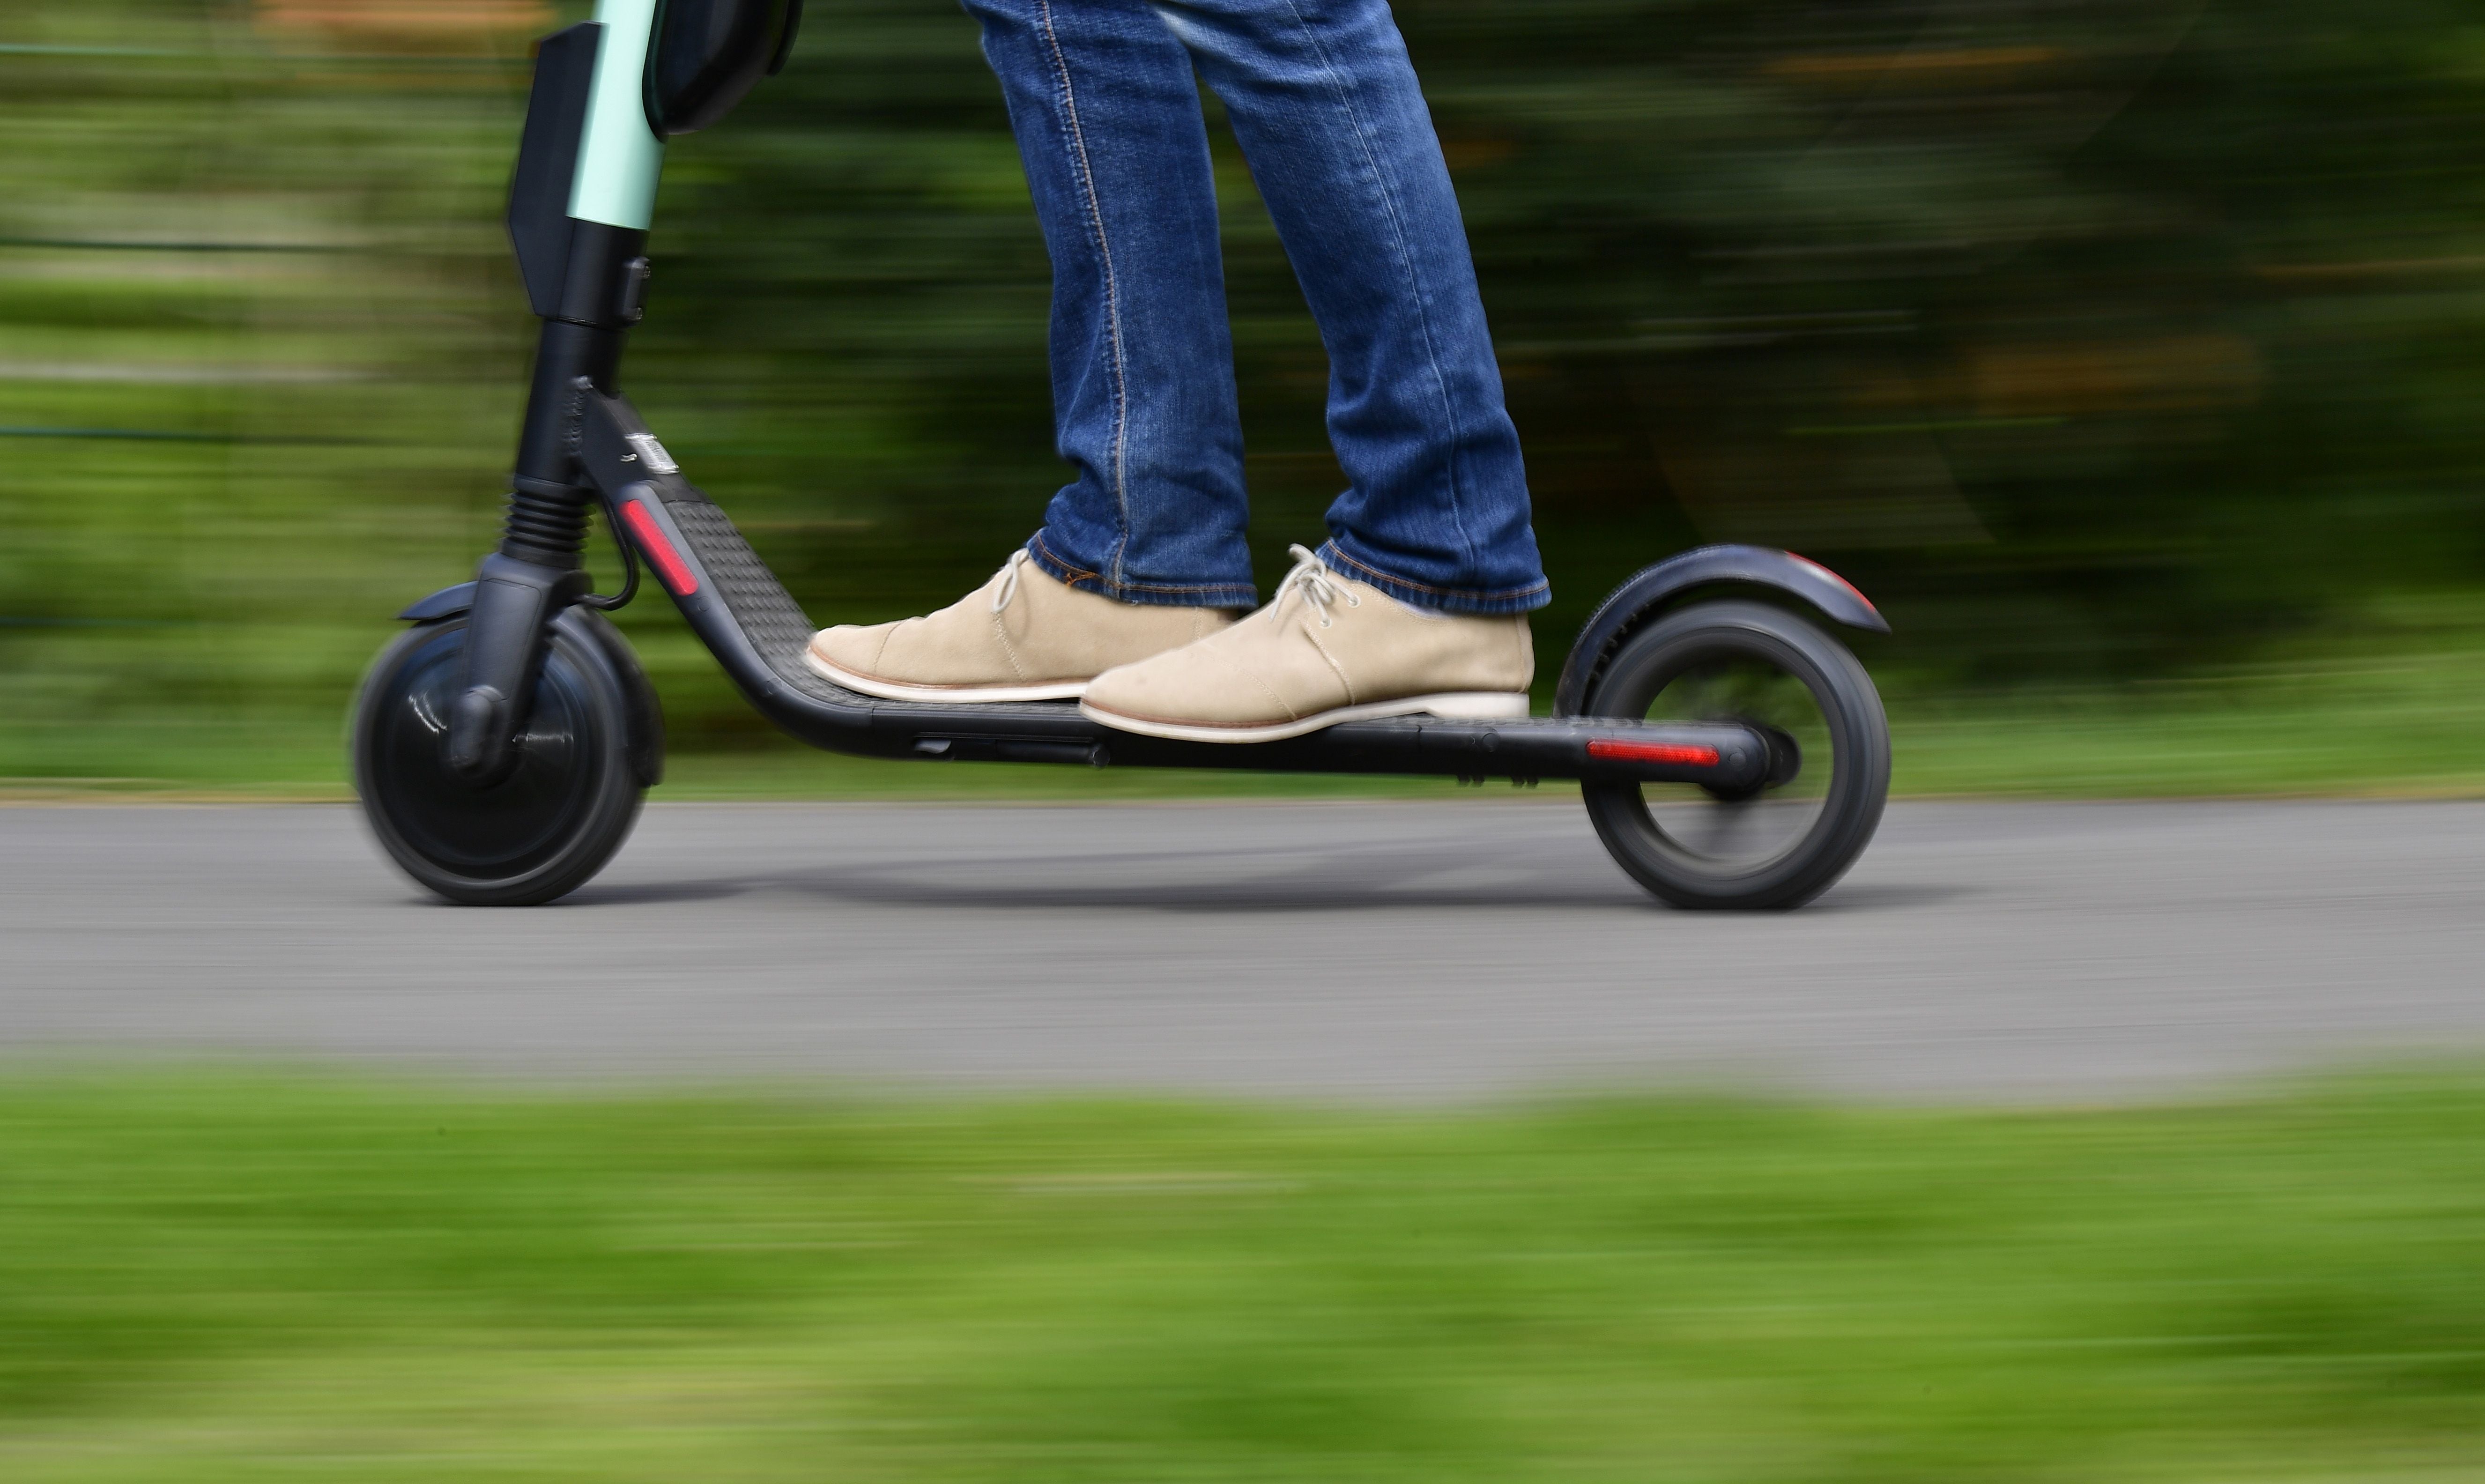 The government is trialing an e-scooter rental scheme in cities across the UK